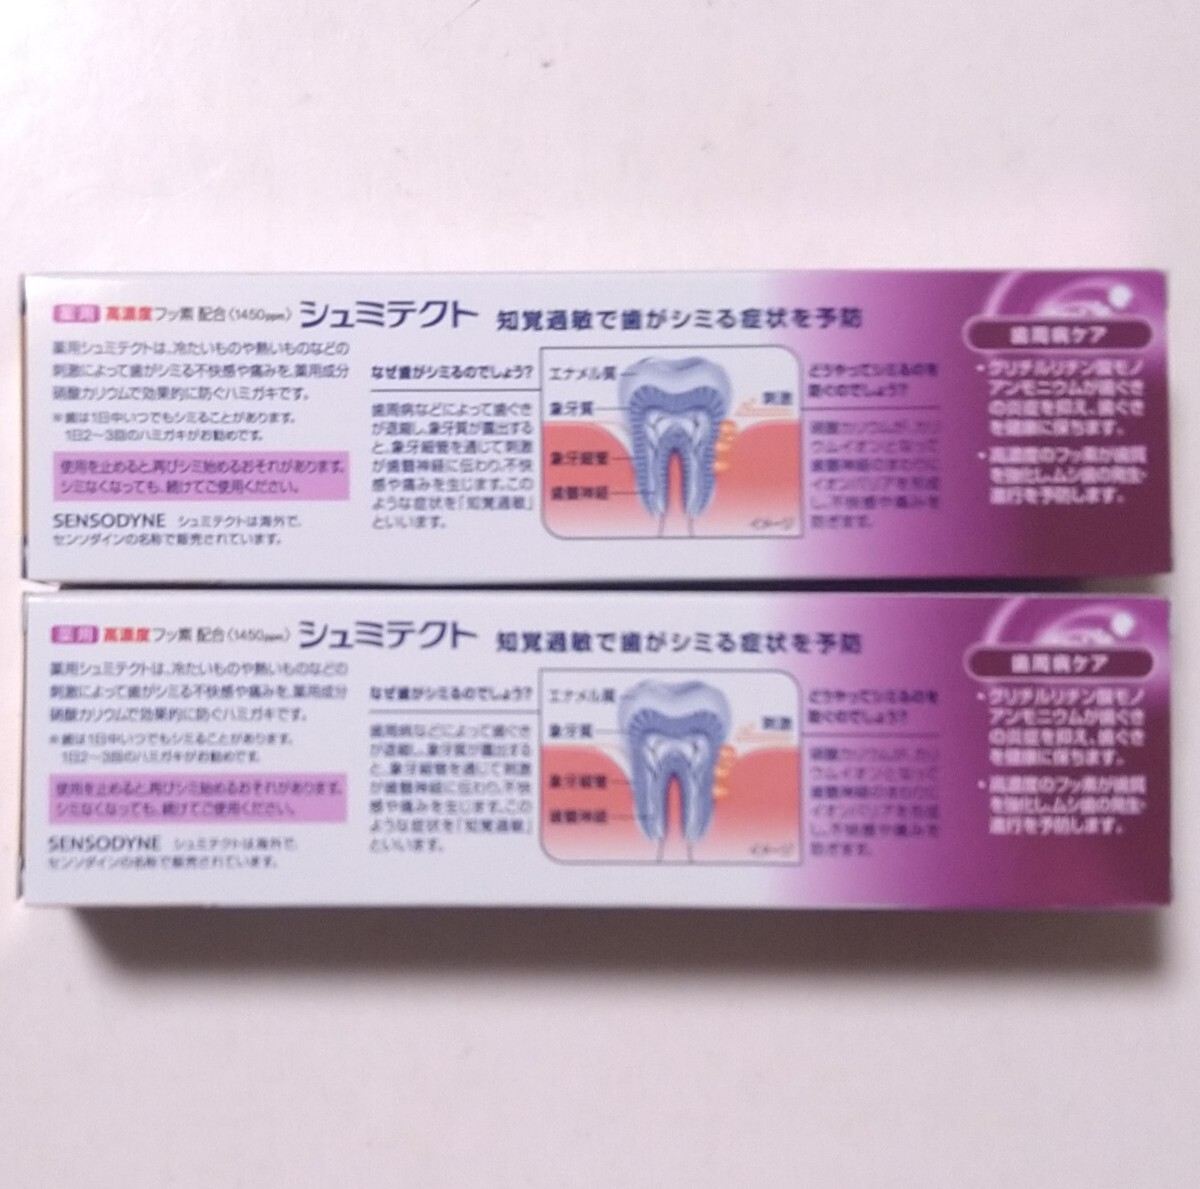  medicine for shumi tech to tooth . sick care is migaki tooth paste 10% increase amount inside capacity 99g 2 piece set 